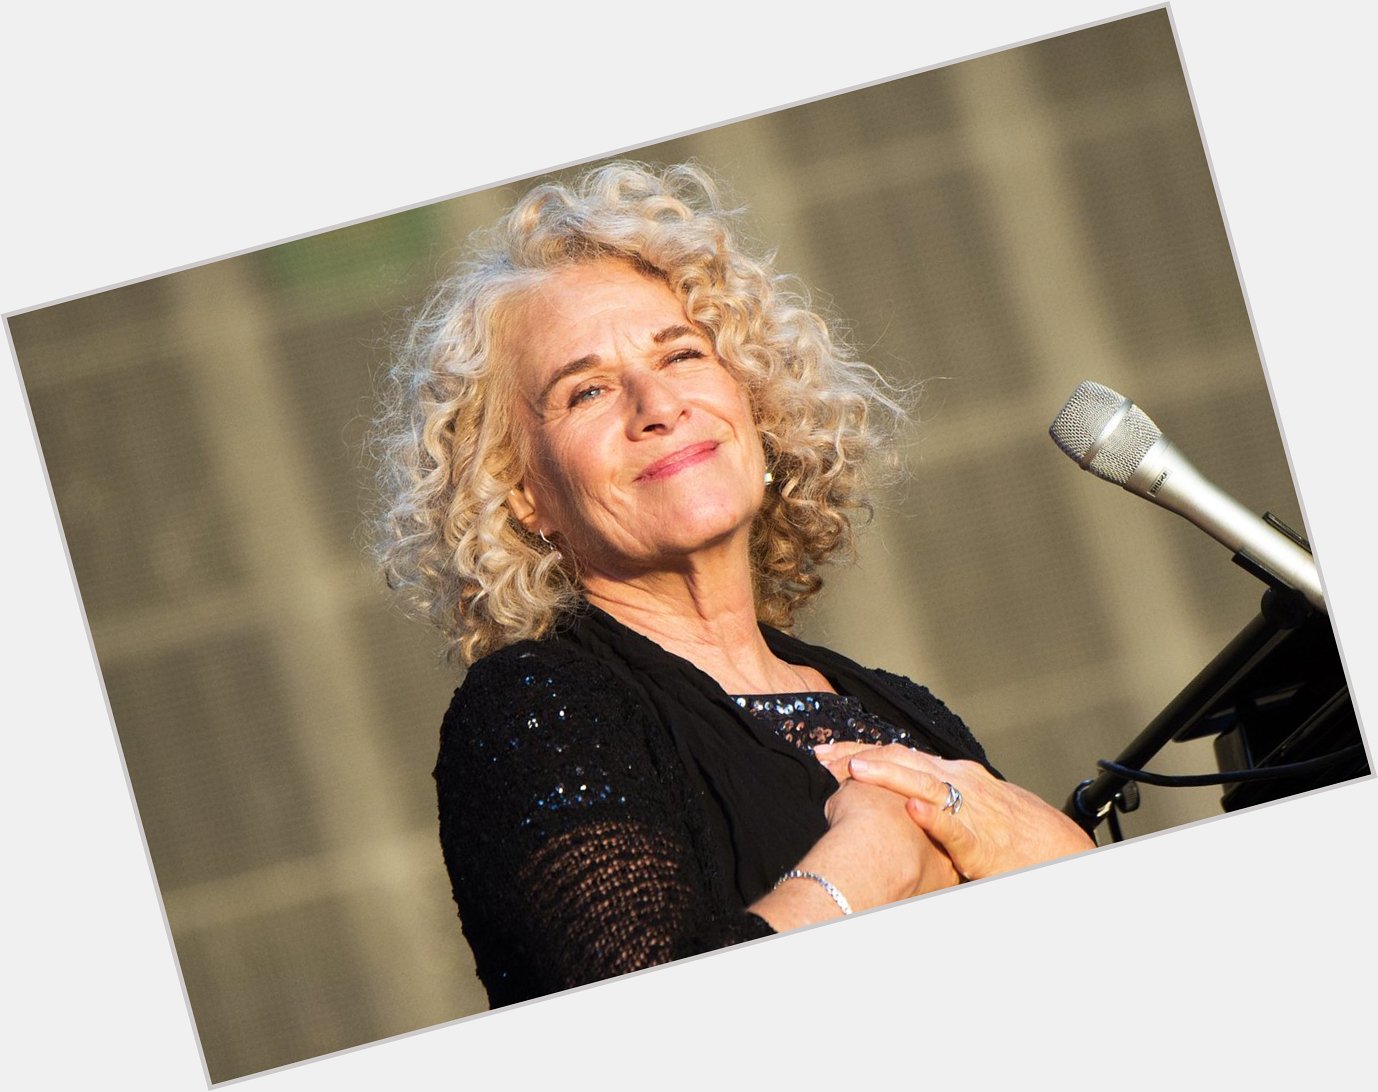 A Big BOSS Happy Birthday today to Carole King from all of us at The Boss! 